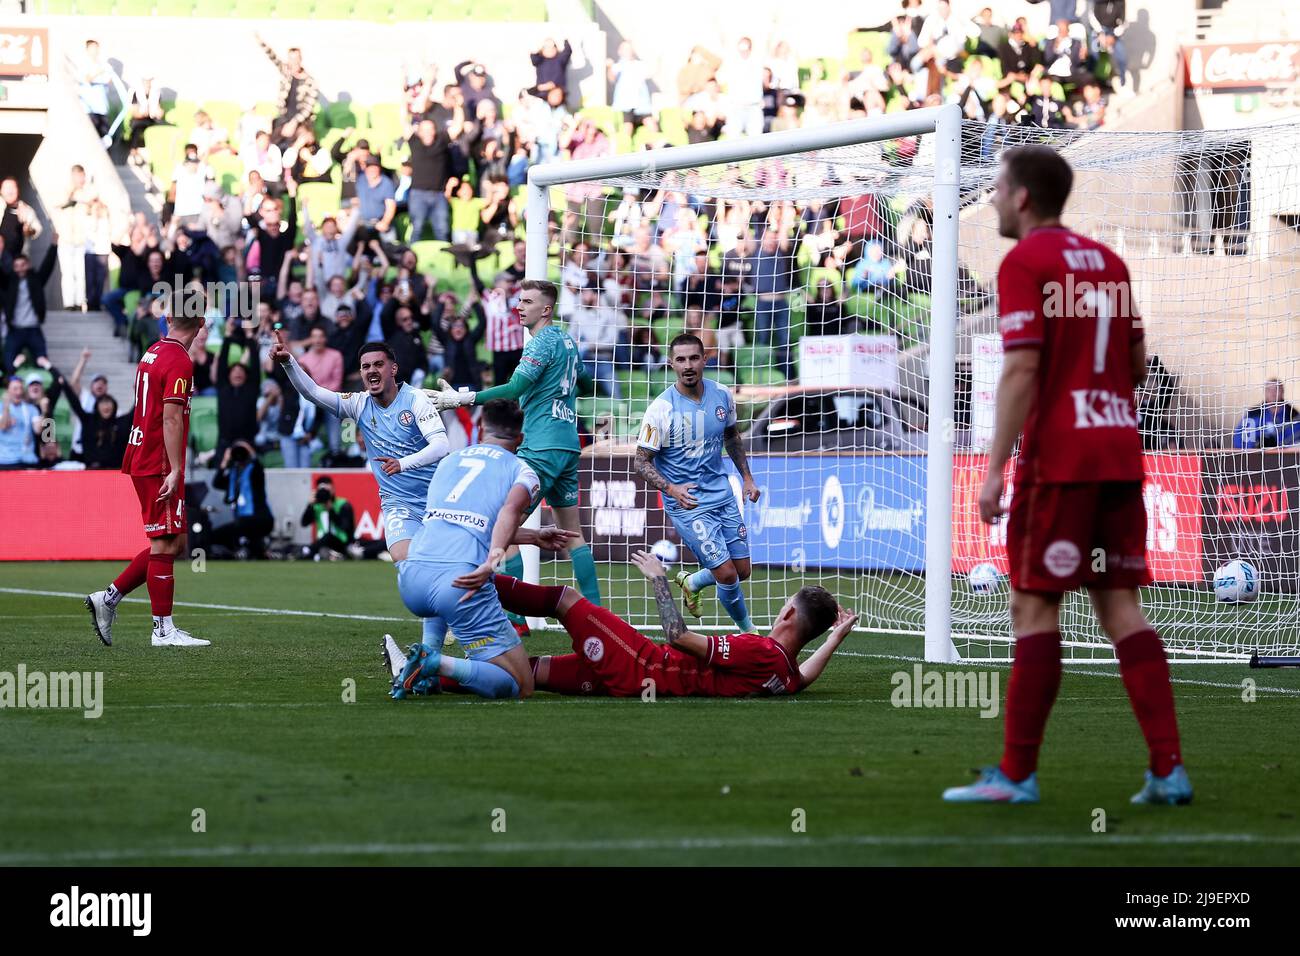 Melbourne, Australia, 22 May, 2022. Marco Tilio of Melbourne City FC scores a goal during the A-League Semi Final soccer match between Melbourne City FC and Adelaide United at AAMI Park on May 22, 2022 in Melbourne, Australia. Credit: Dave Hewison/Speed Media/Alamy Live News Stock Photo